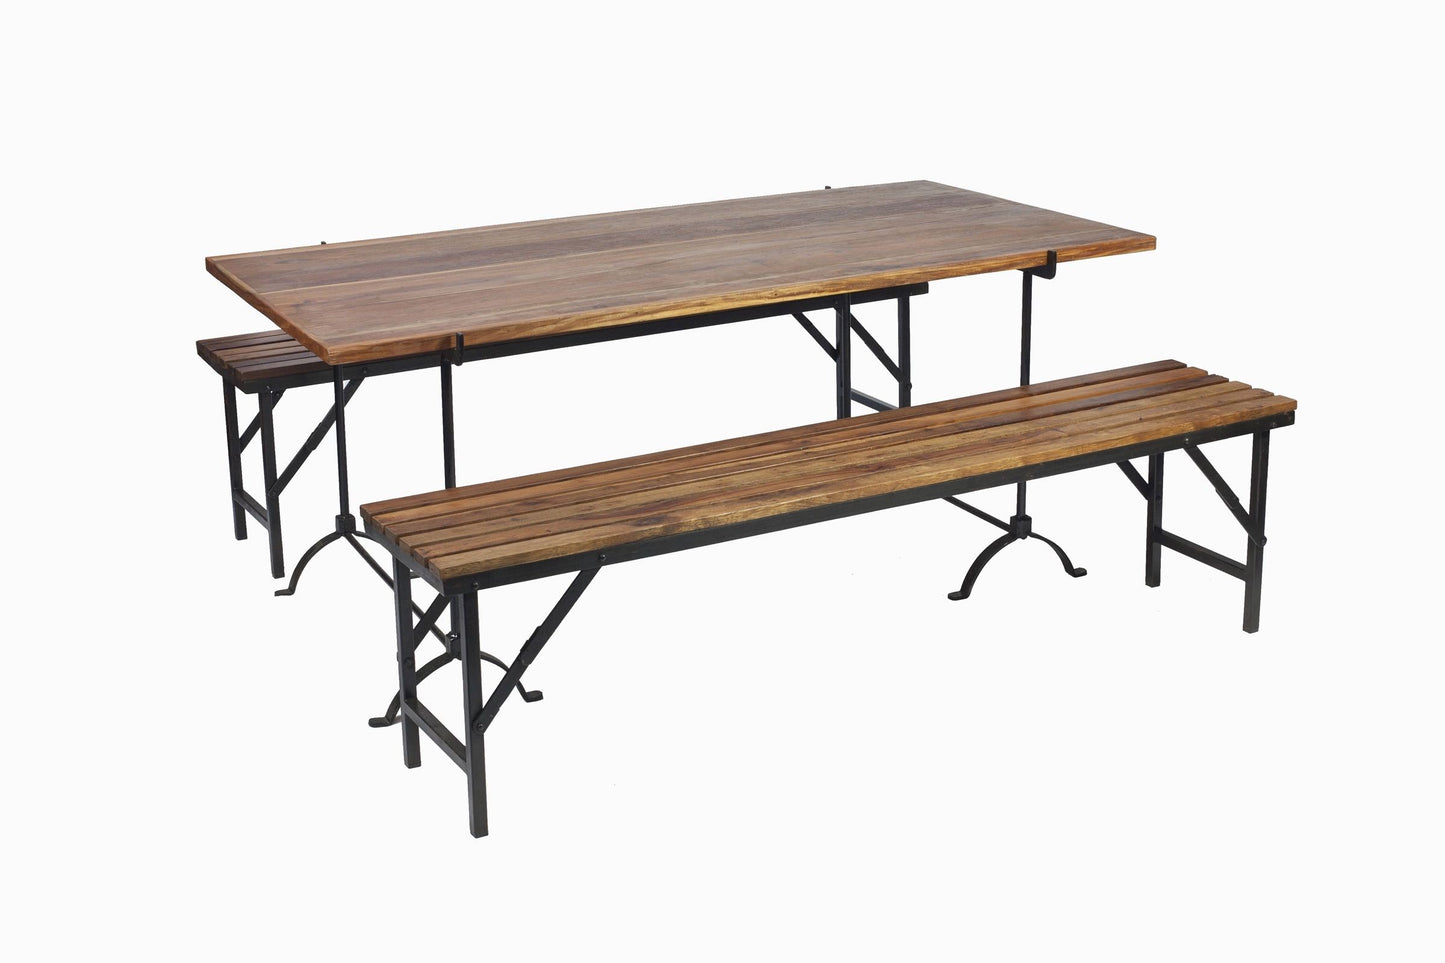 WOOD & IRON TRESTLE TABLE WITH BENCHES